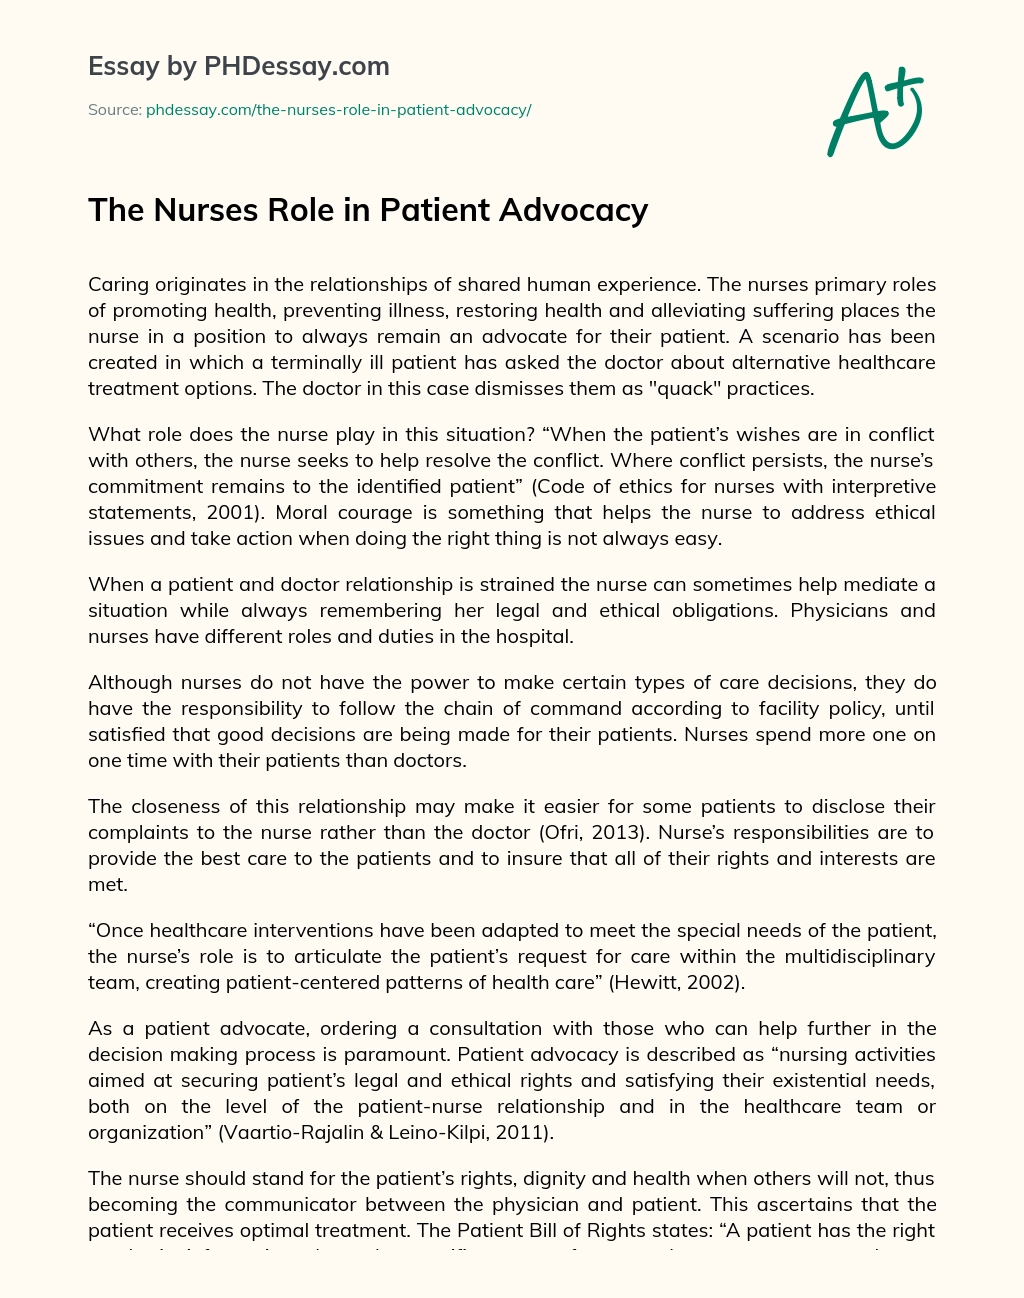 The Nurses Role in Patient Advocacy essay